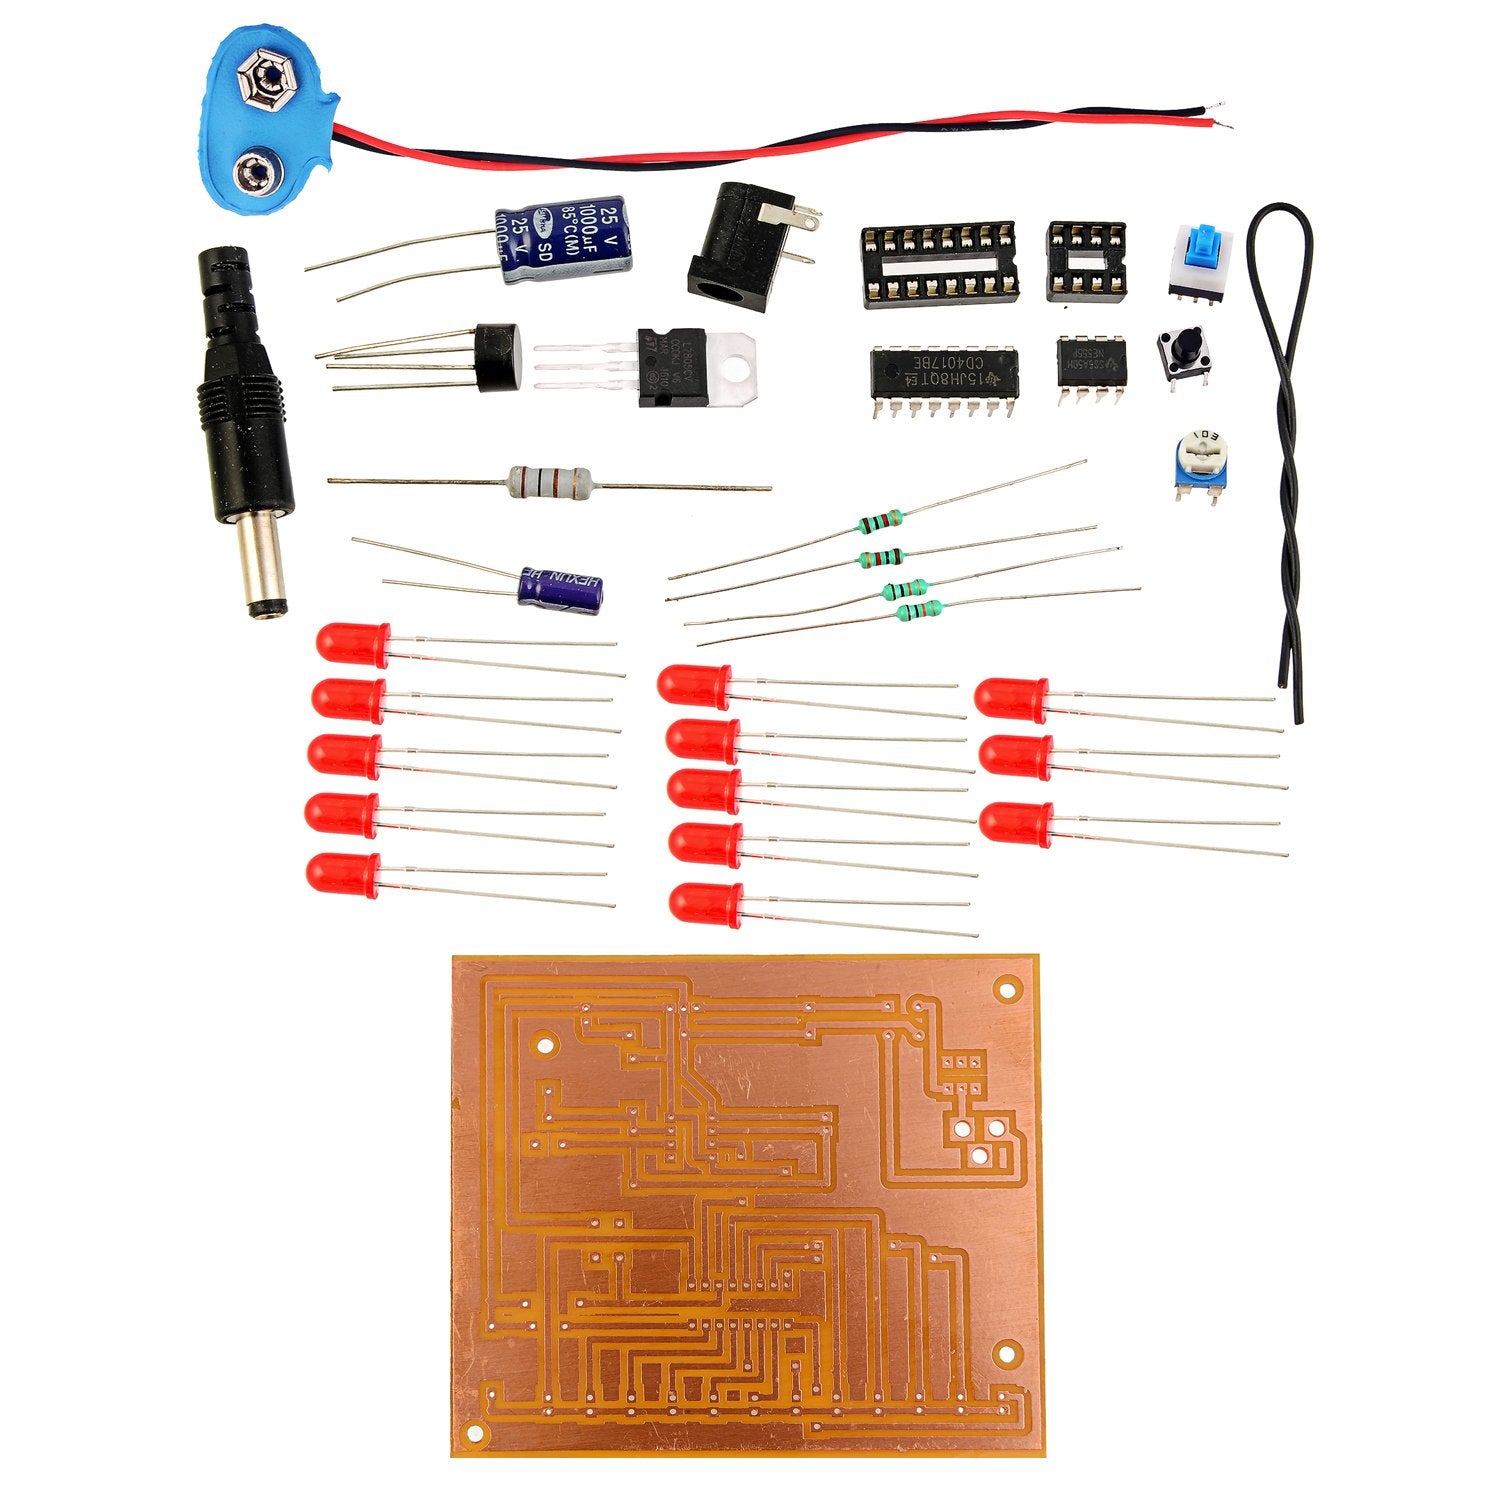 DIY Kit - 555 Timer Based Binary Counter : Mini Projects